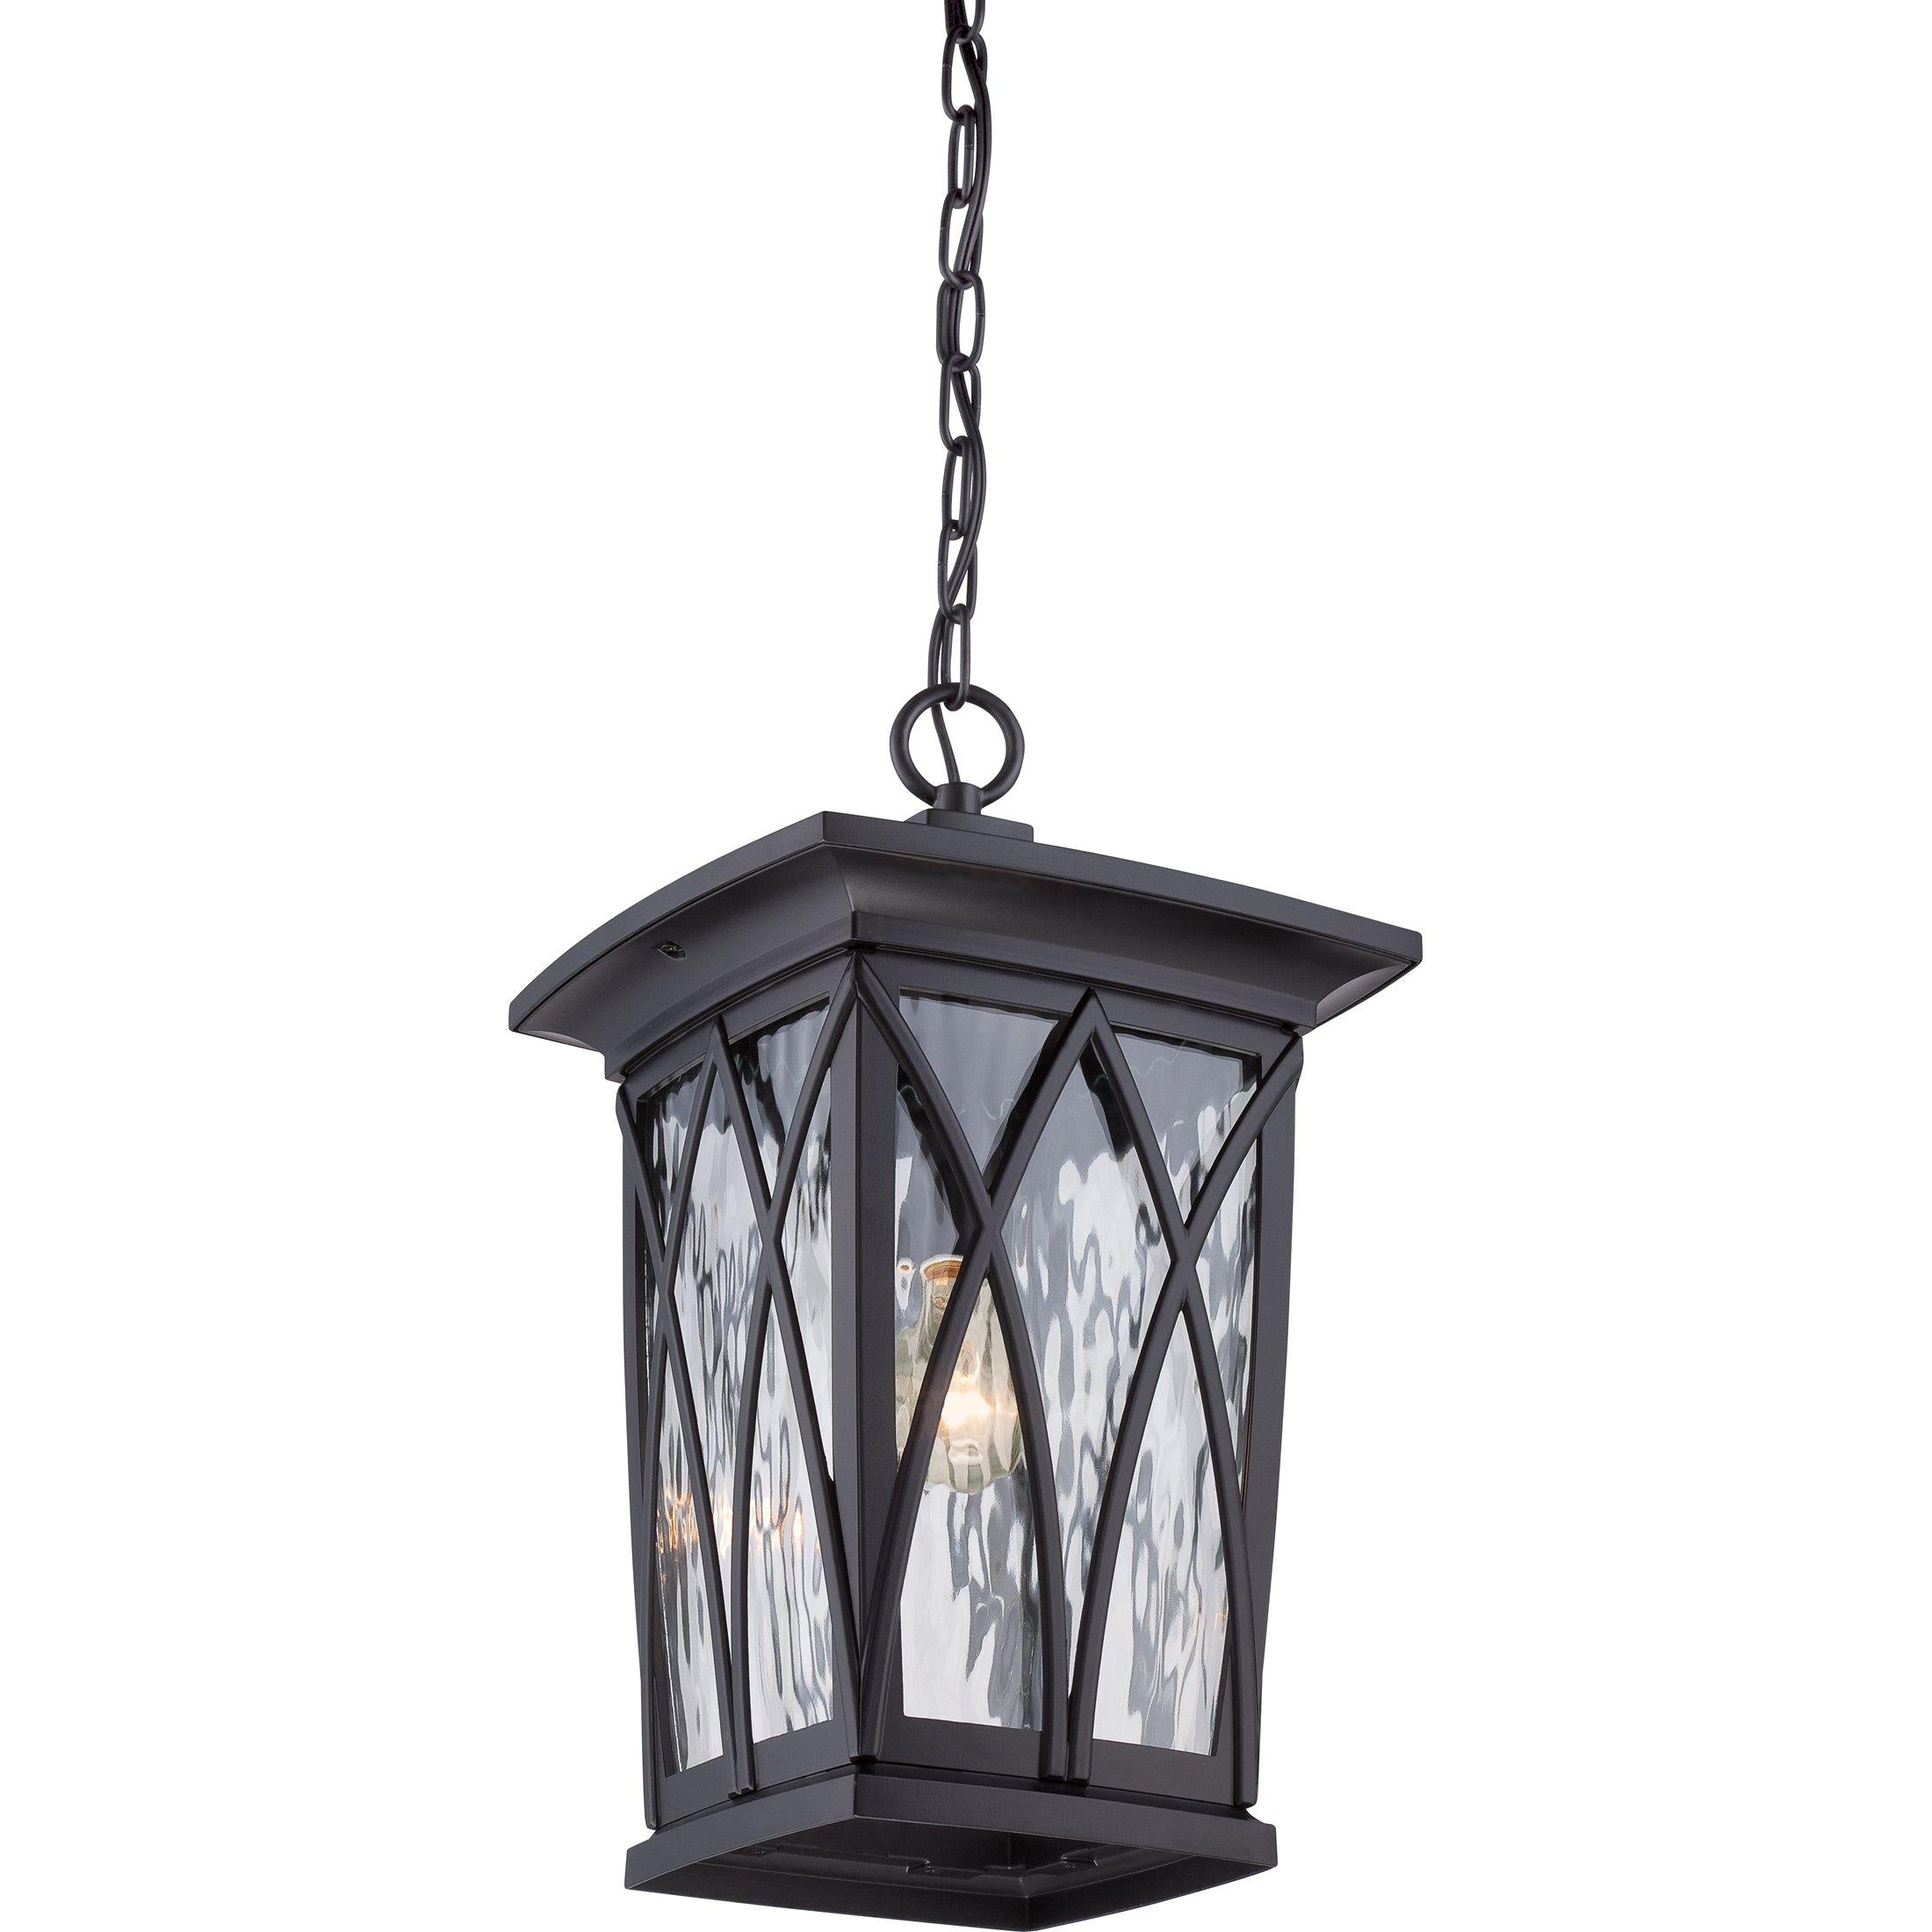 Quoizel Grover Outdoor Lantern, Hanging